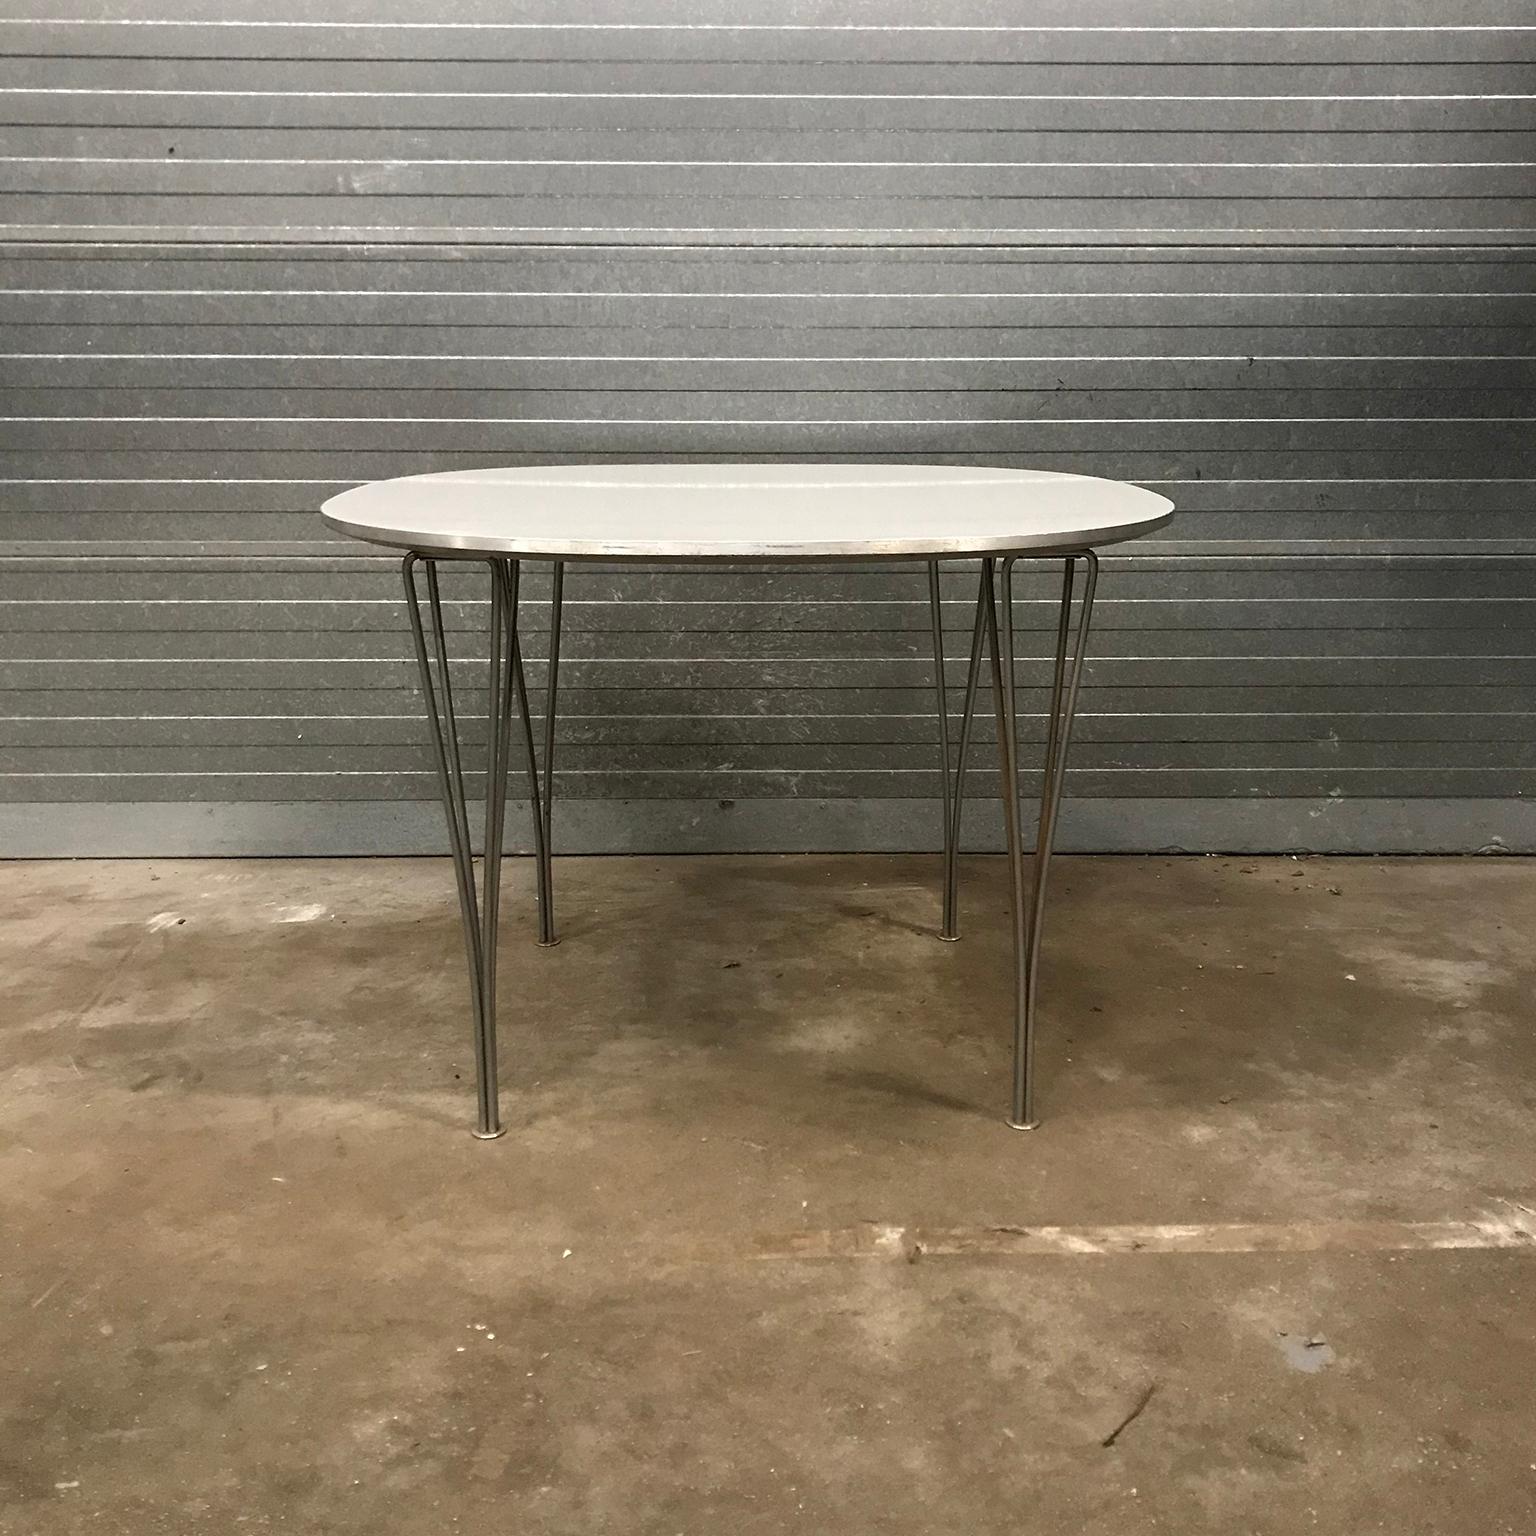 Beautiful and elegant designed square dining table with round corners. The table shows traces of wear like tabletop has just some minor scratches some light, hardly noticeable 'bubbles' under the coating top (see picture #12 at the blue arrows). The